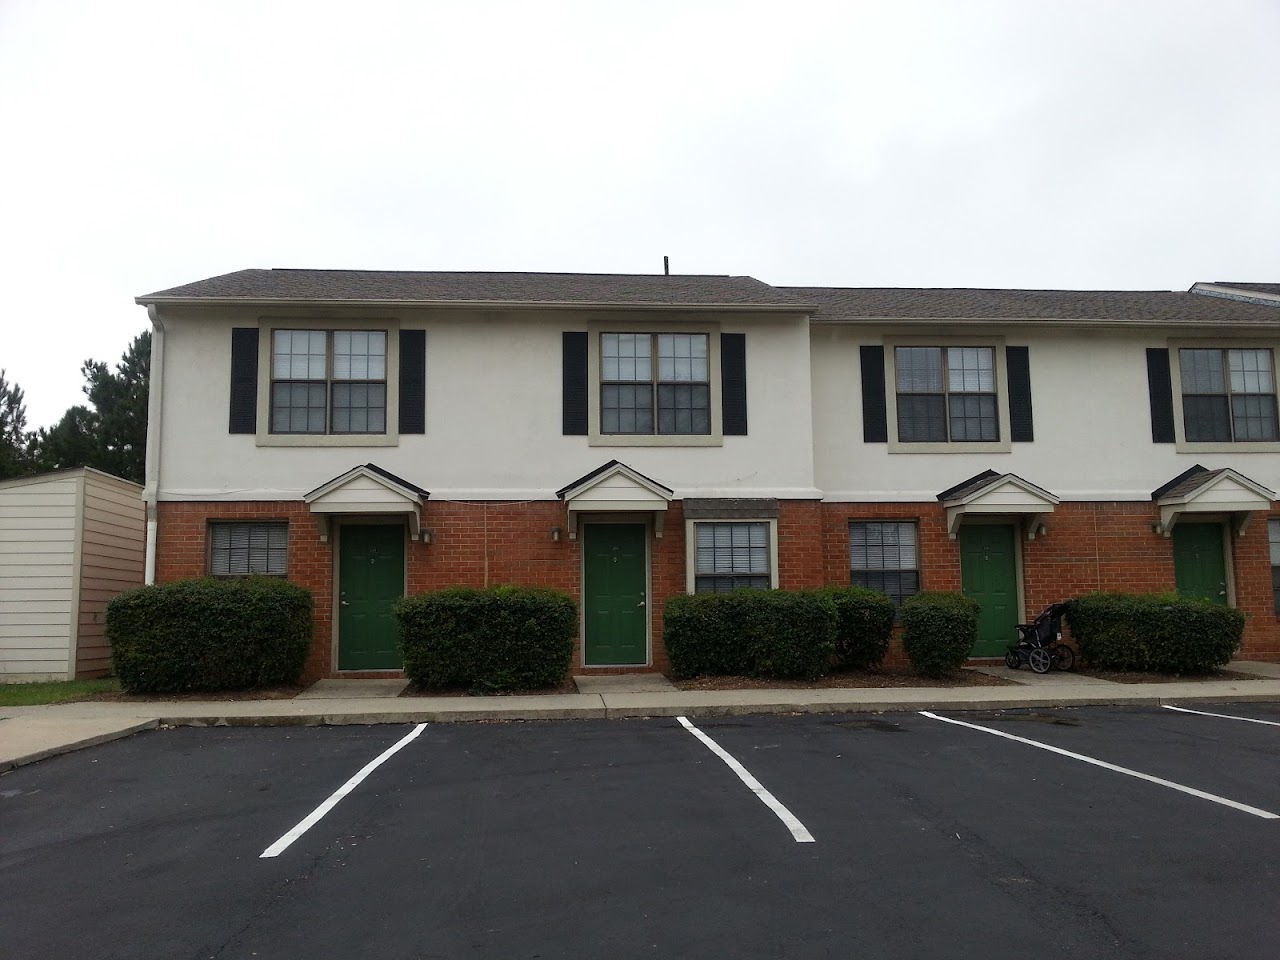 Photo of THOMSON VILLAS. Affordable housing located at 642 FOREST CLARY DRIVE EXT. THOMSON, GA 30824